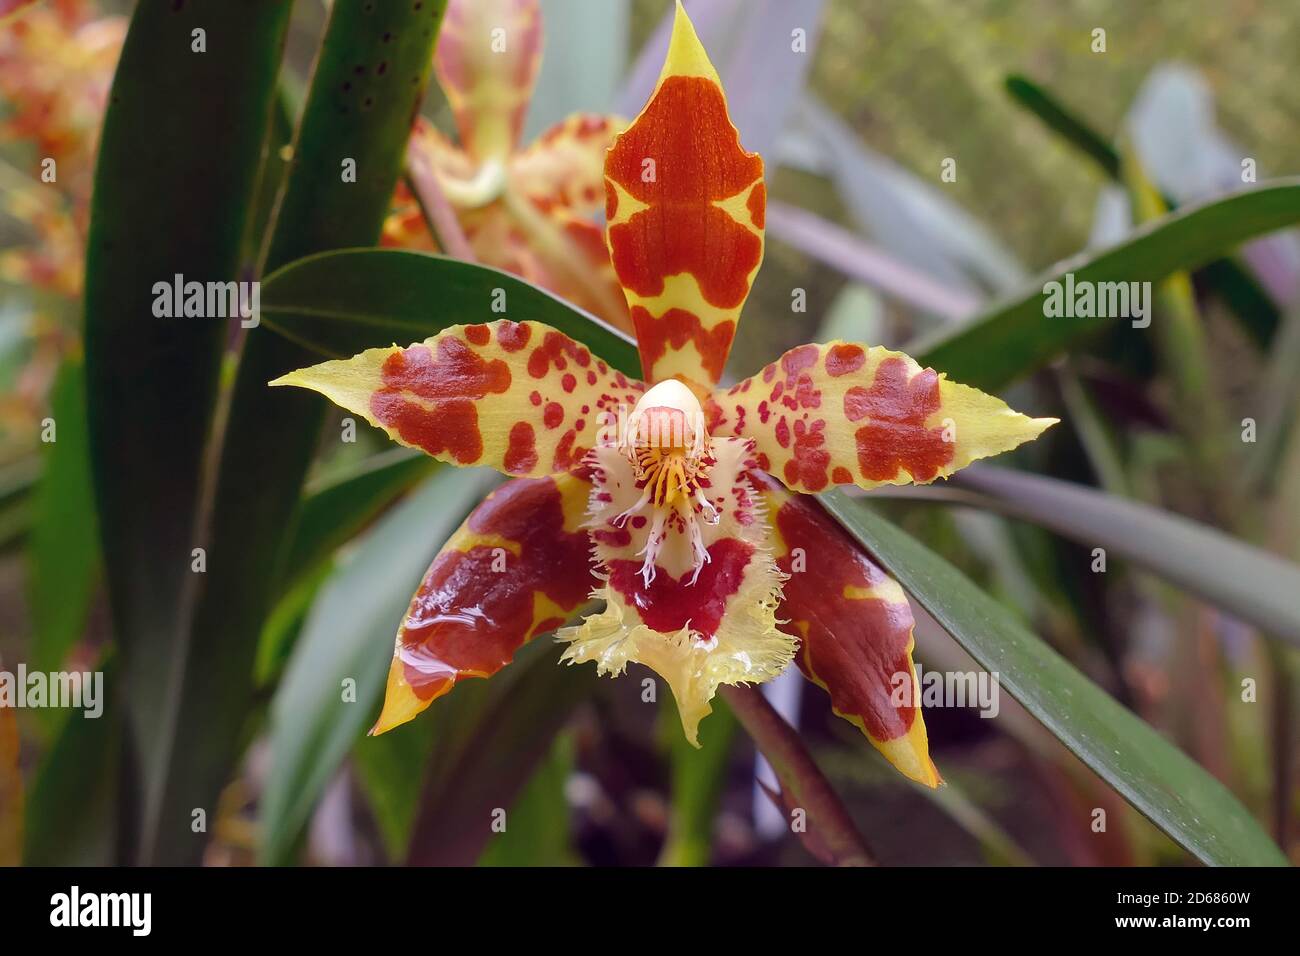 Oncidium, Red and Yellow Flower in a Garden Stock Photo